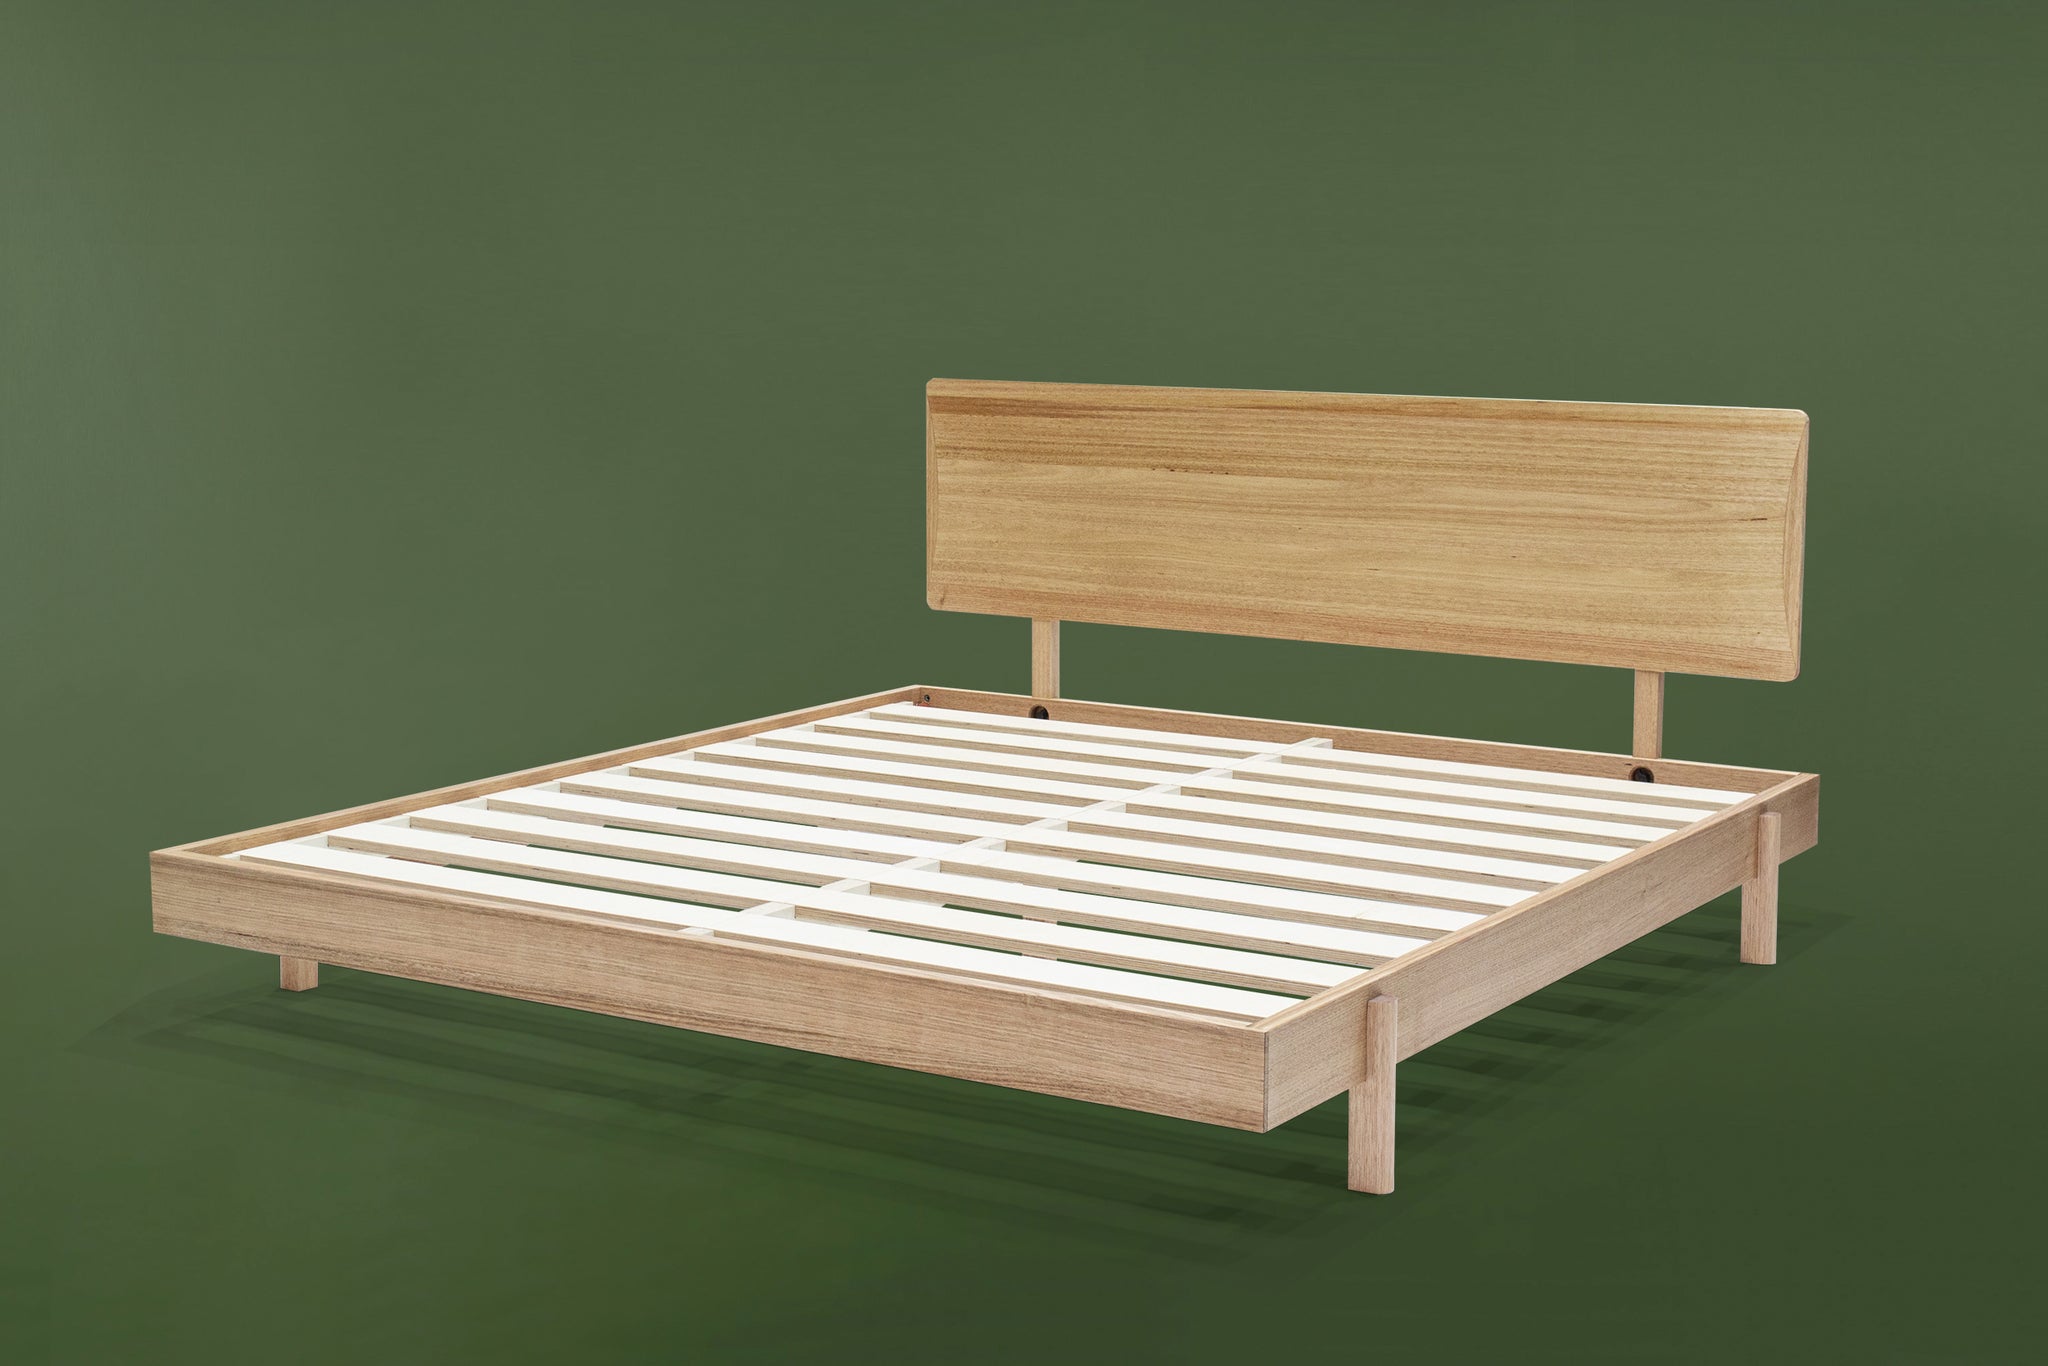 The Bed with Headboard